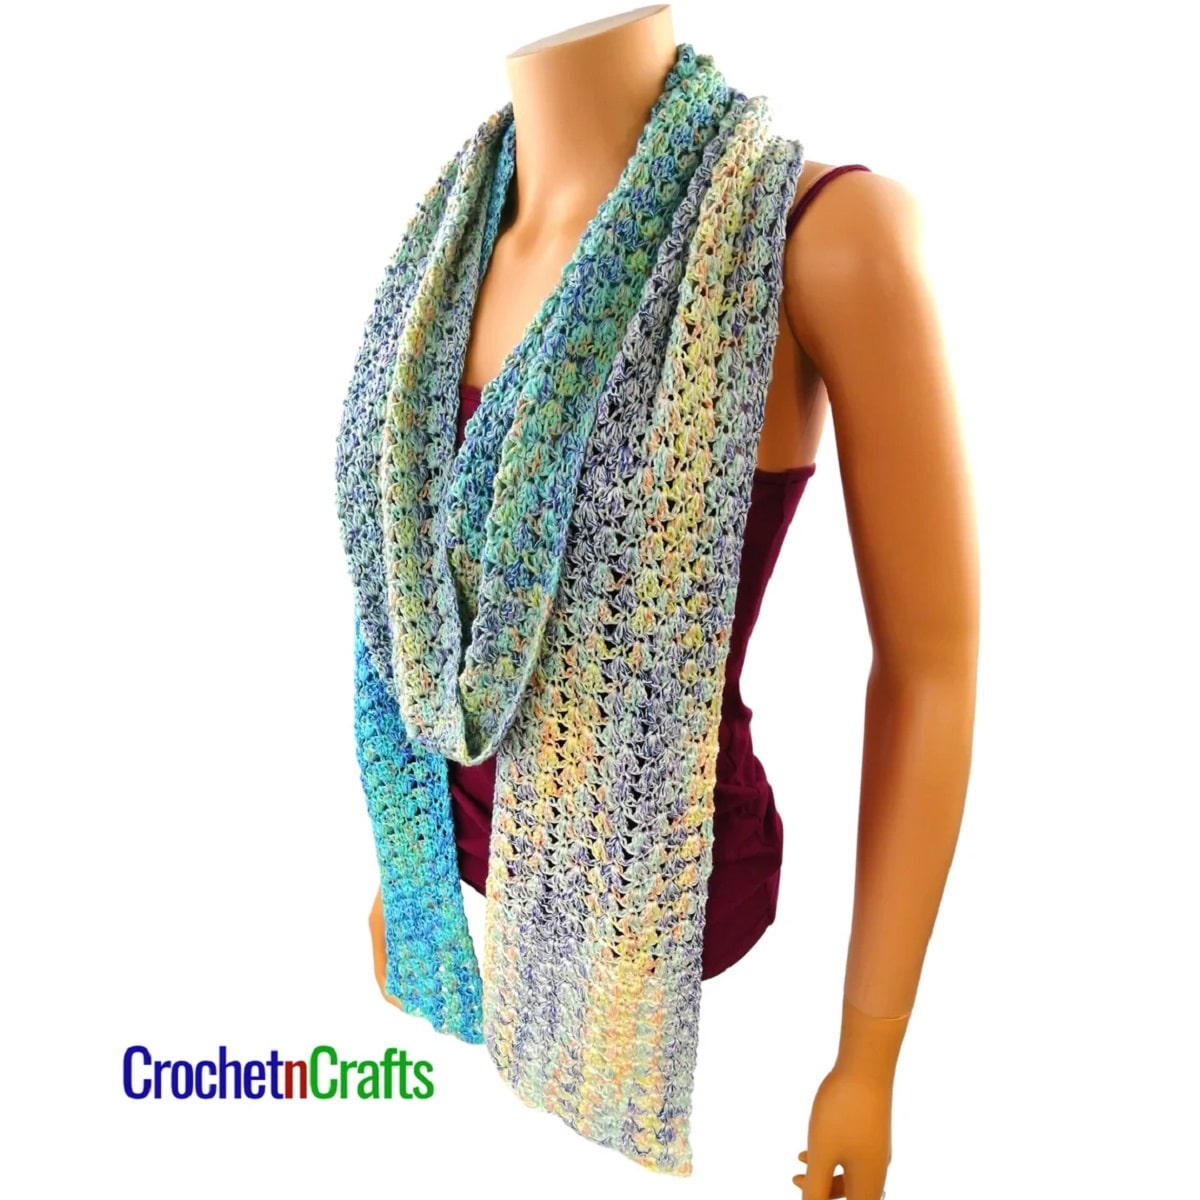 Mannequin wearing blue, purple, and green crochet scarf wrapped around its neck on a white background.